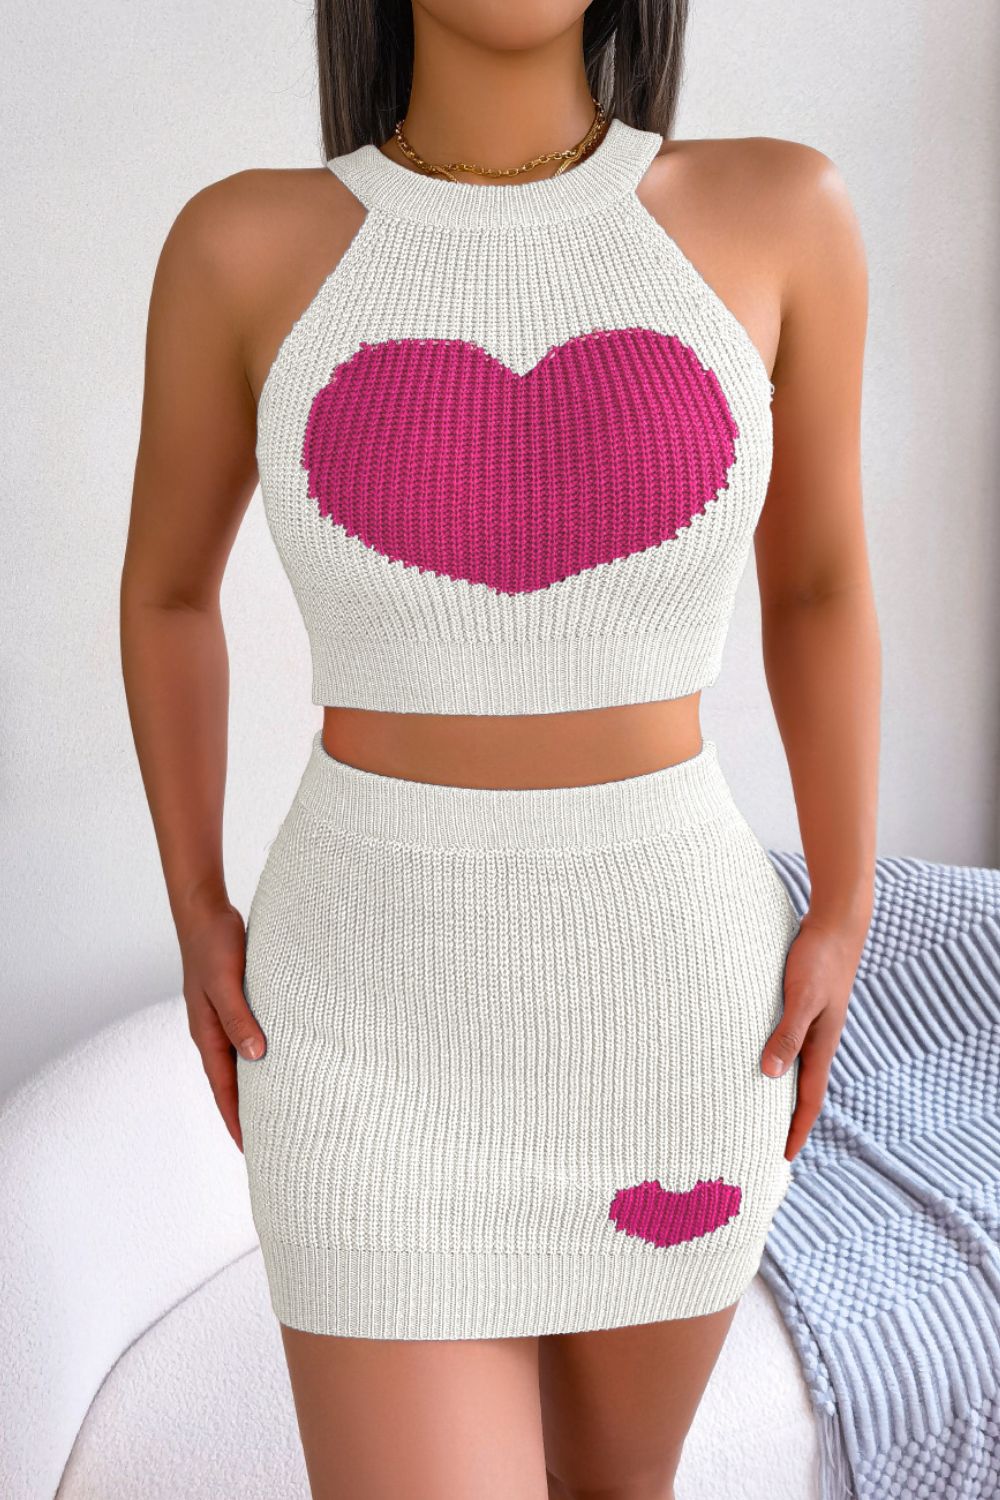 Heart Contrast Ribbed Sleeveless Knit Top and Skirt Set - White / S Girl Code